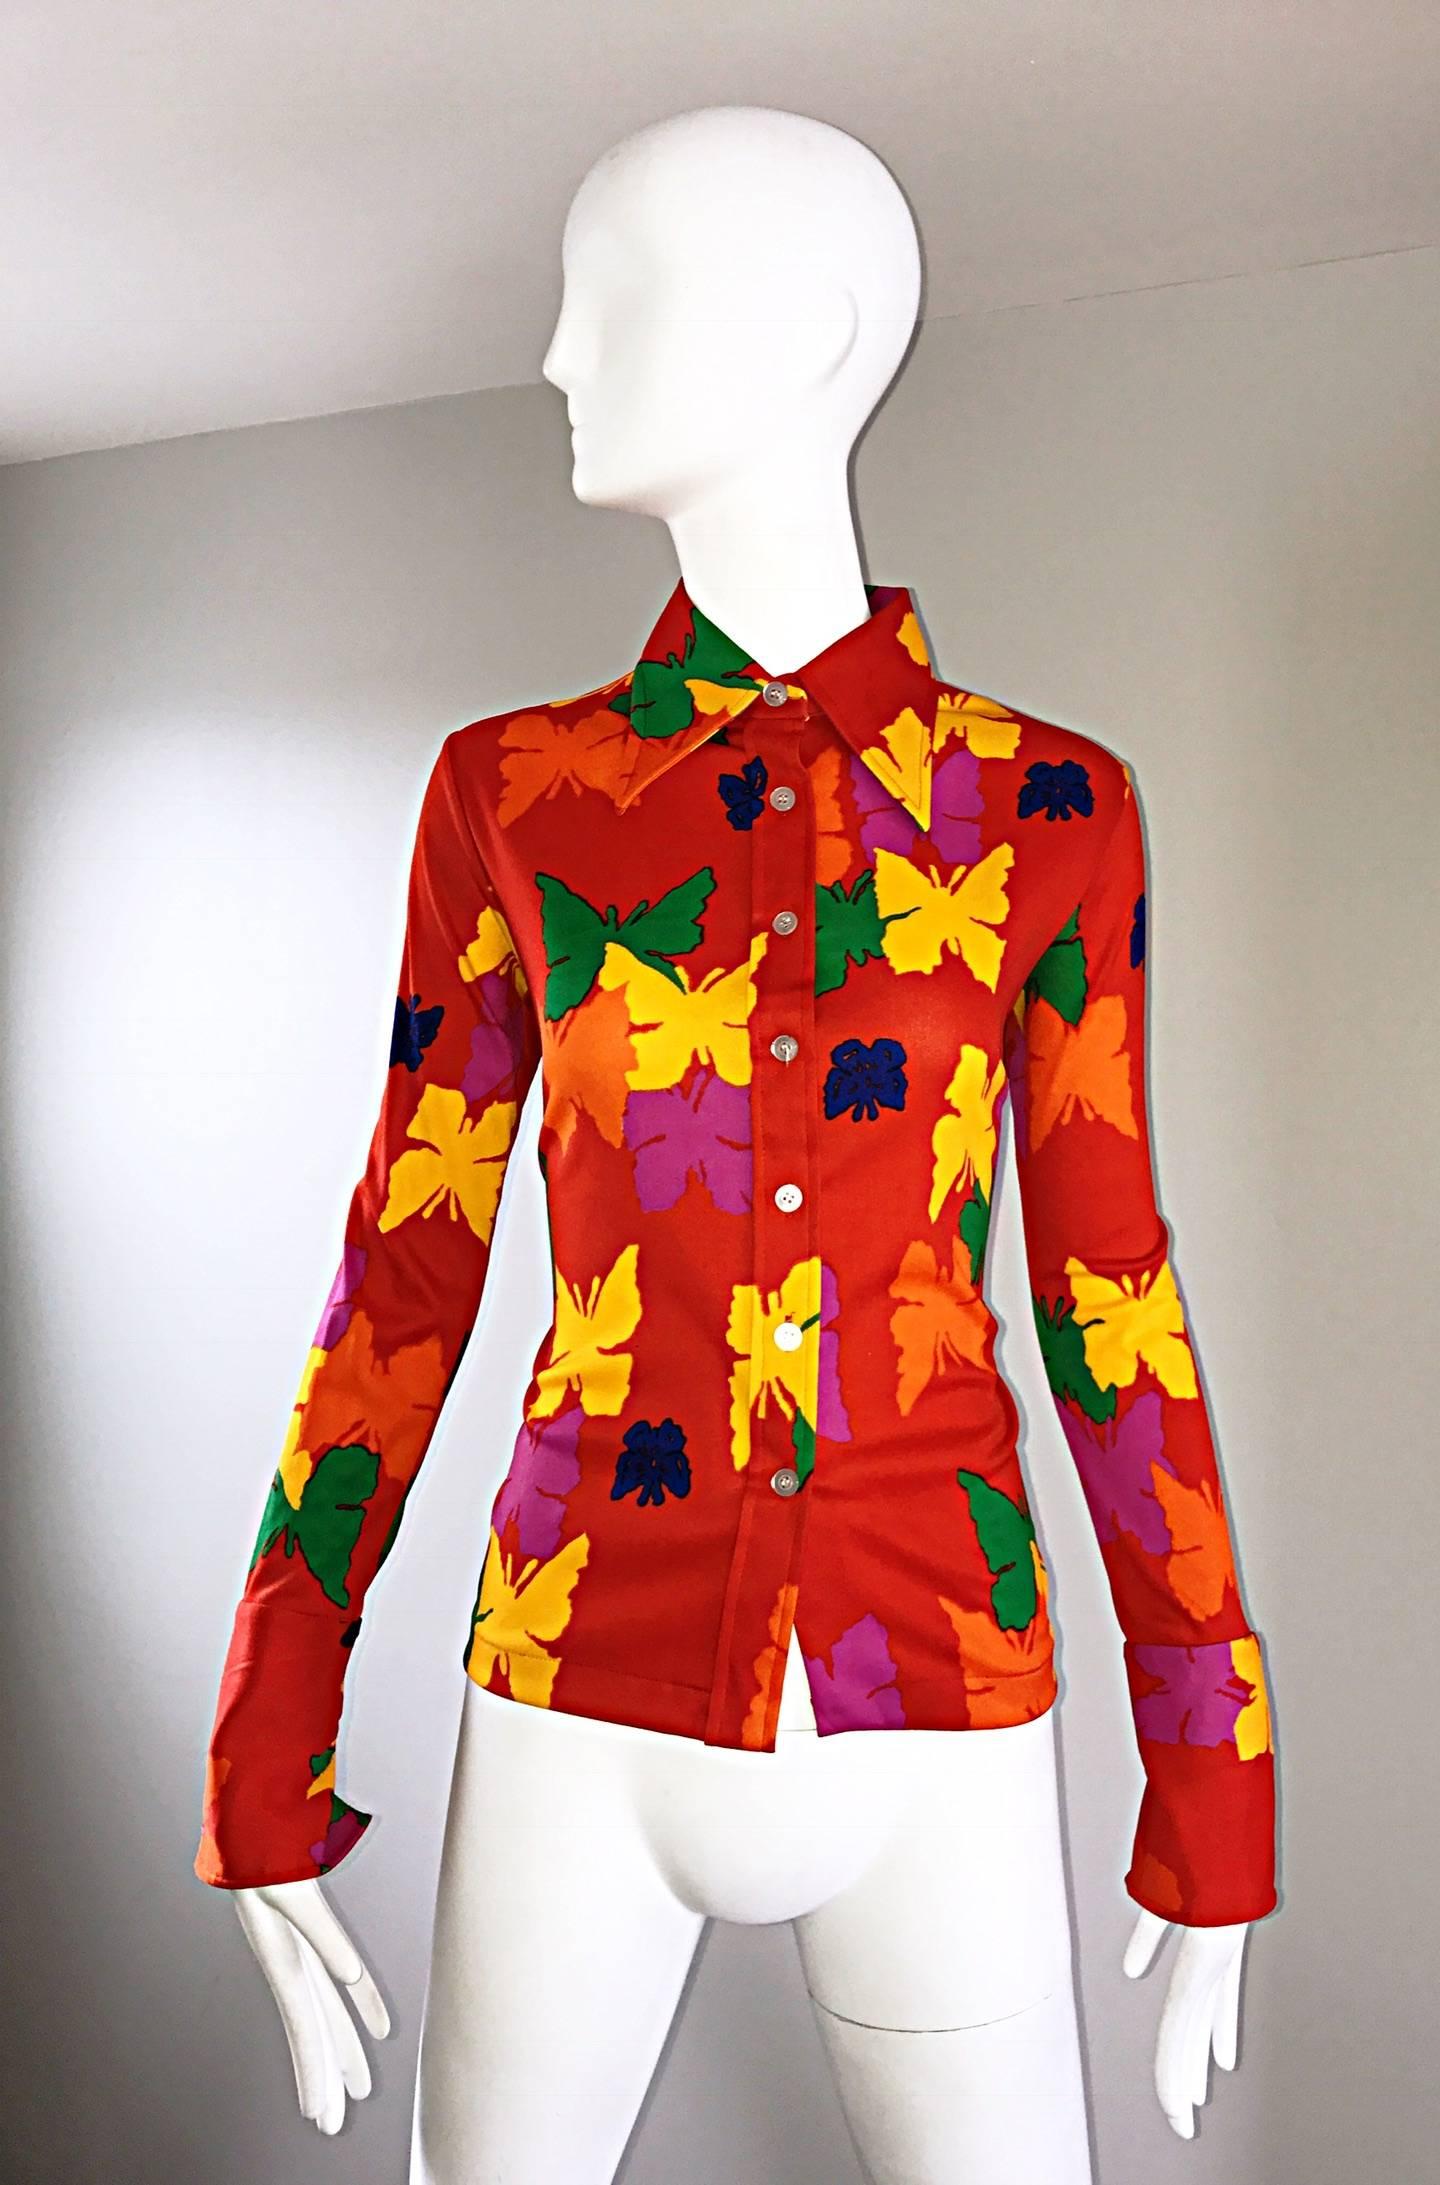 Amazing 1970s ANDREW ST JOHN bright neon orange colorful butterfly disco blouse! Features screen printed pink, yellow, green, blue and orange butterflies throughout. Chic exaggerated signature 70s lapels. Fitted bodice stretches to fit. Buttons up